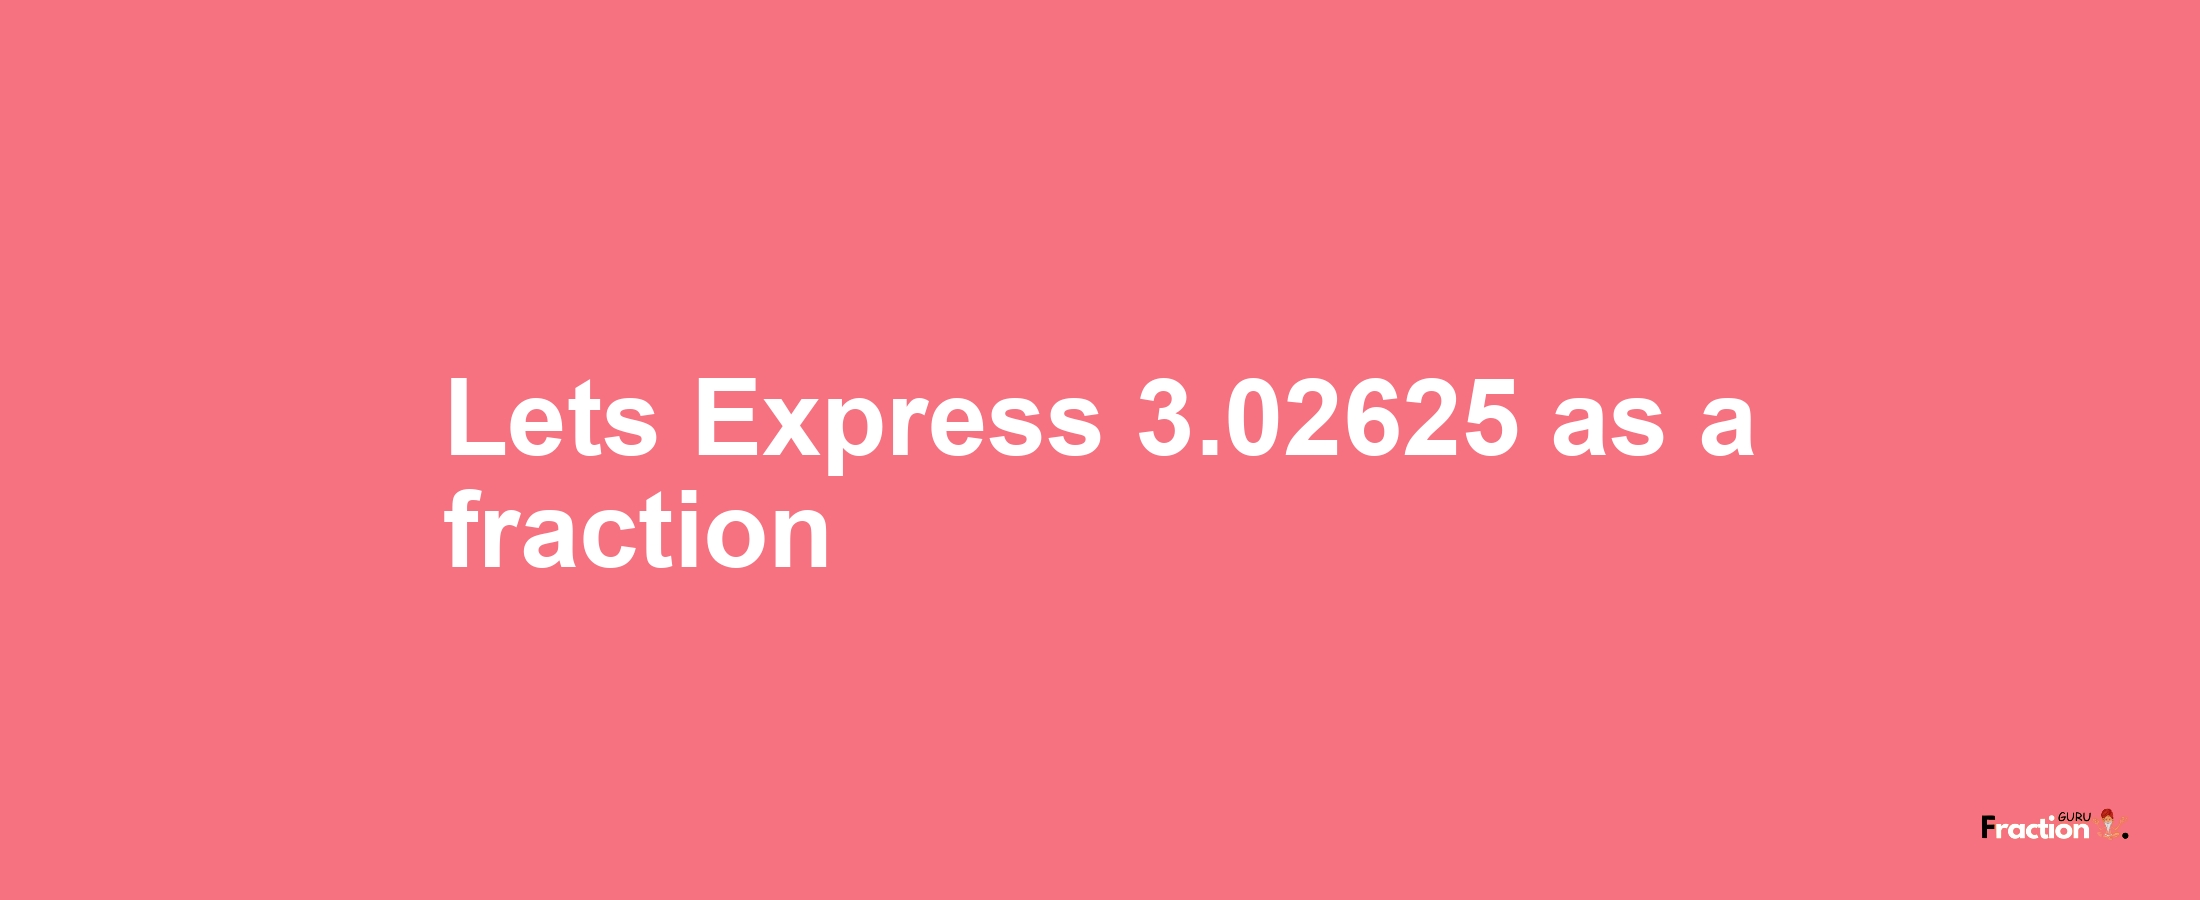 Lets Express 3.02625 as afraction